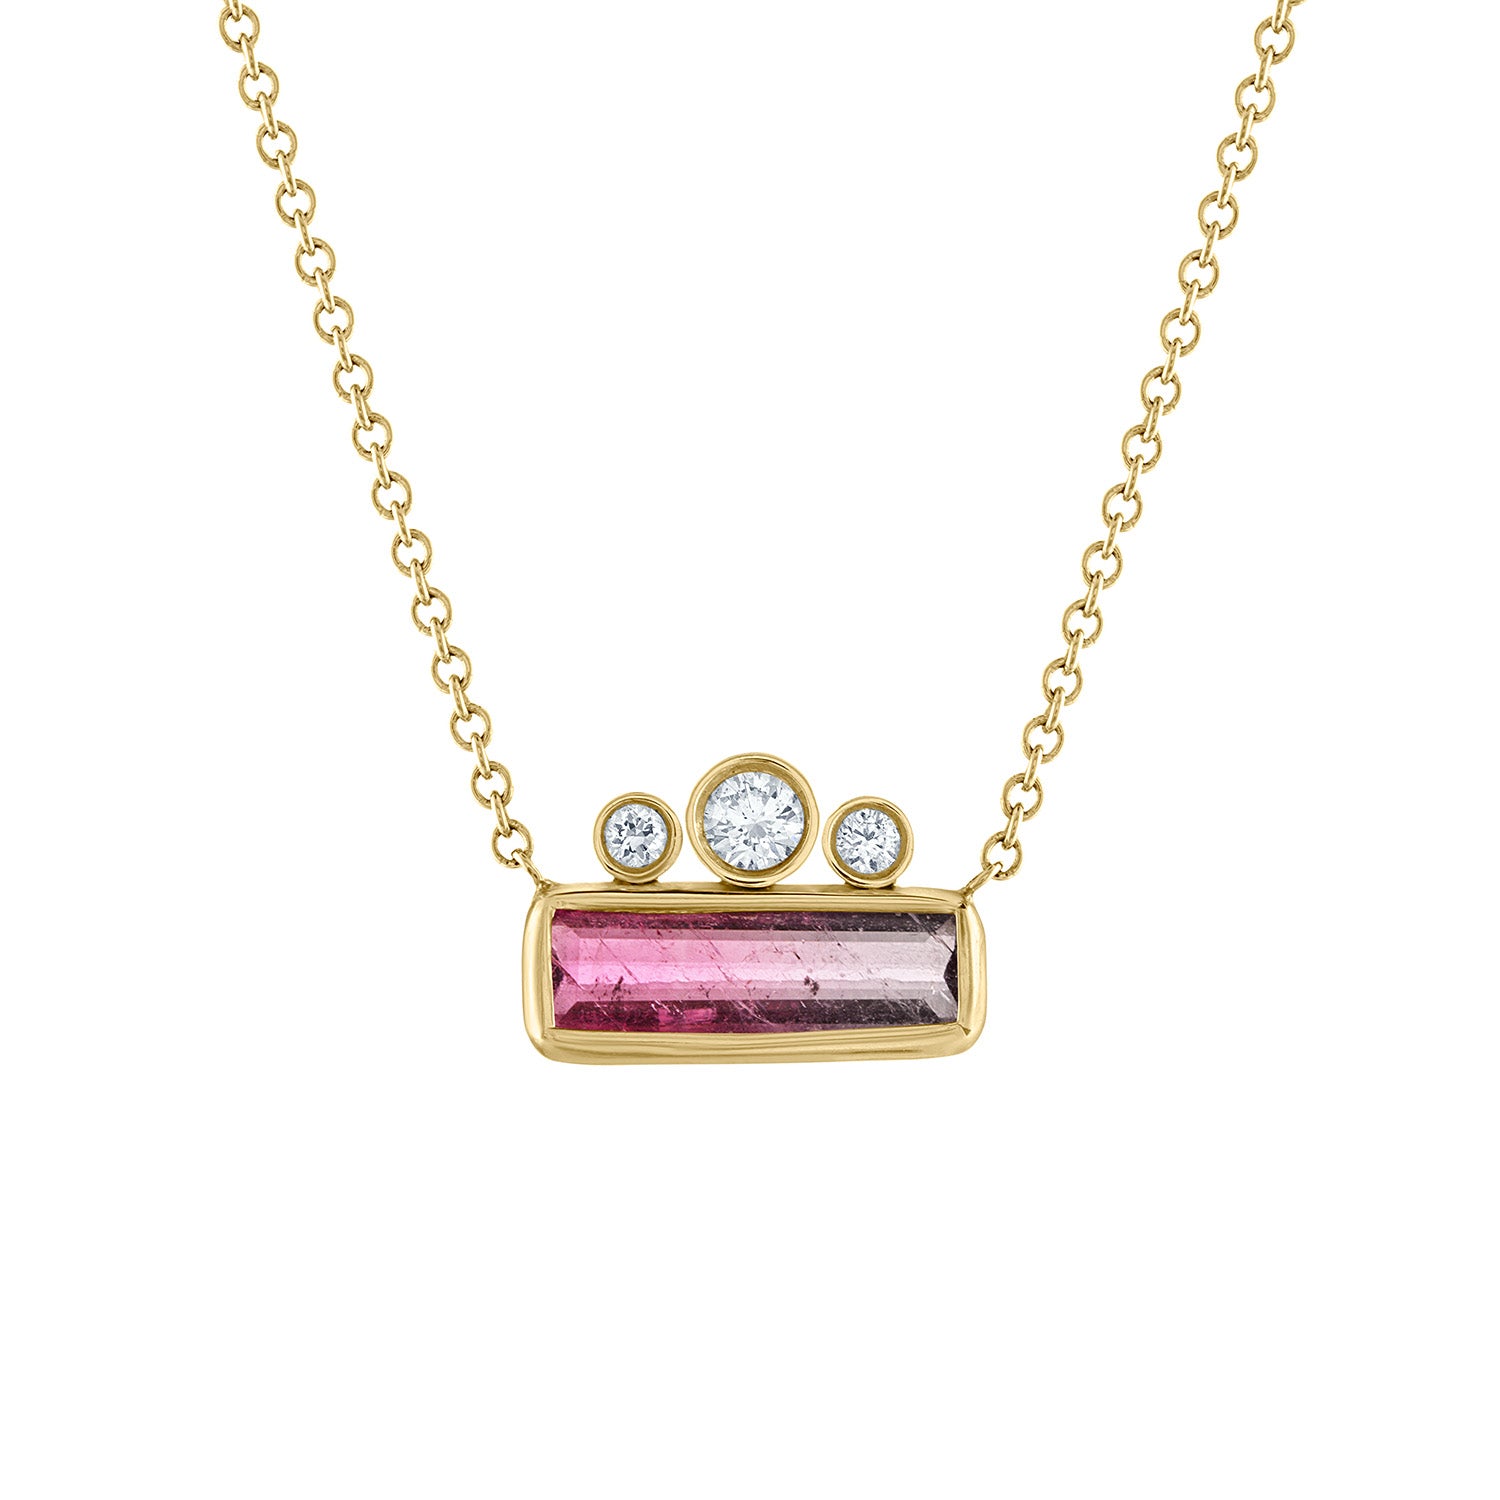 Necklace Triade of diamonds on top of bicolor tourmaline set in 14k yellow gold